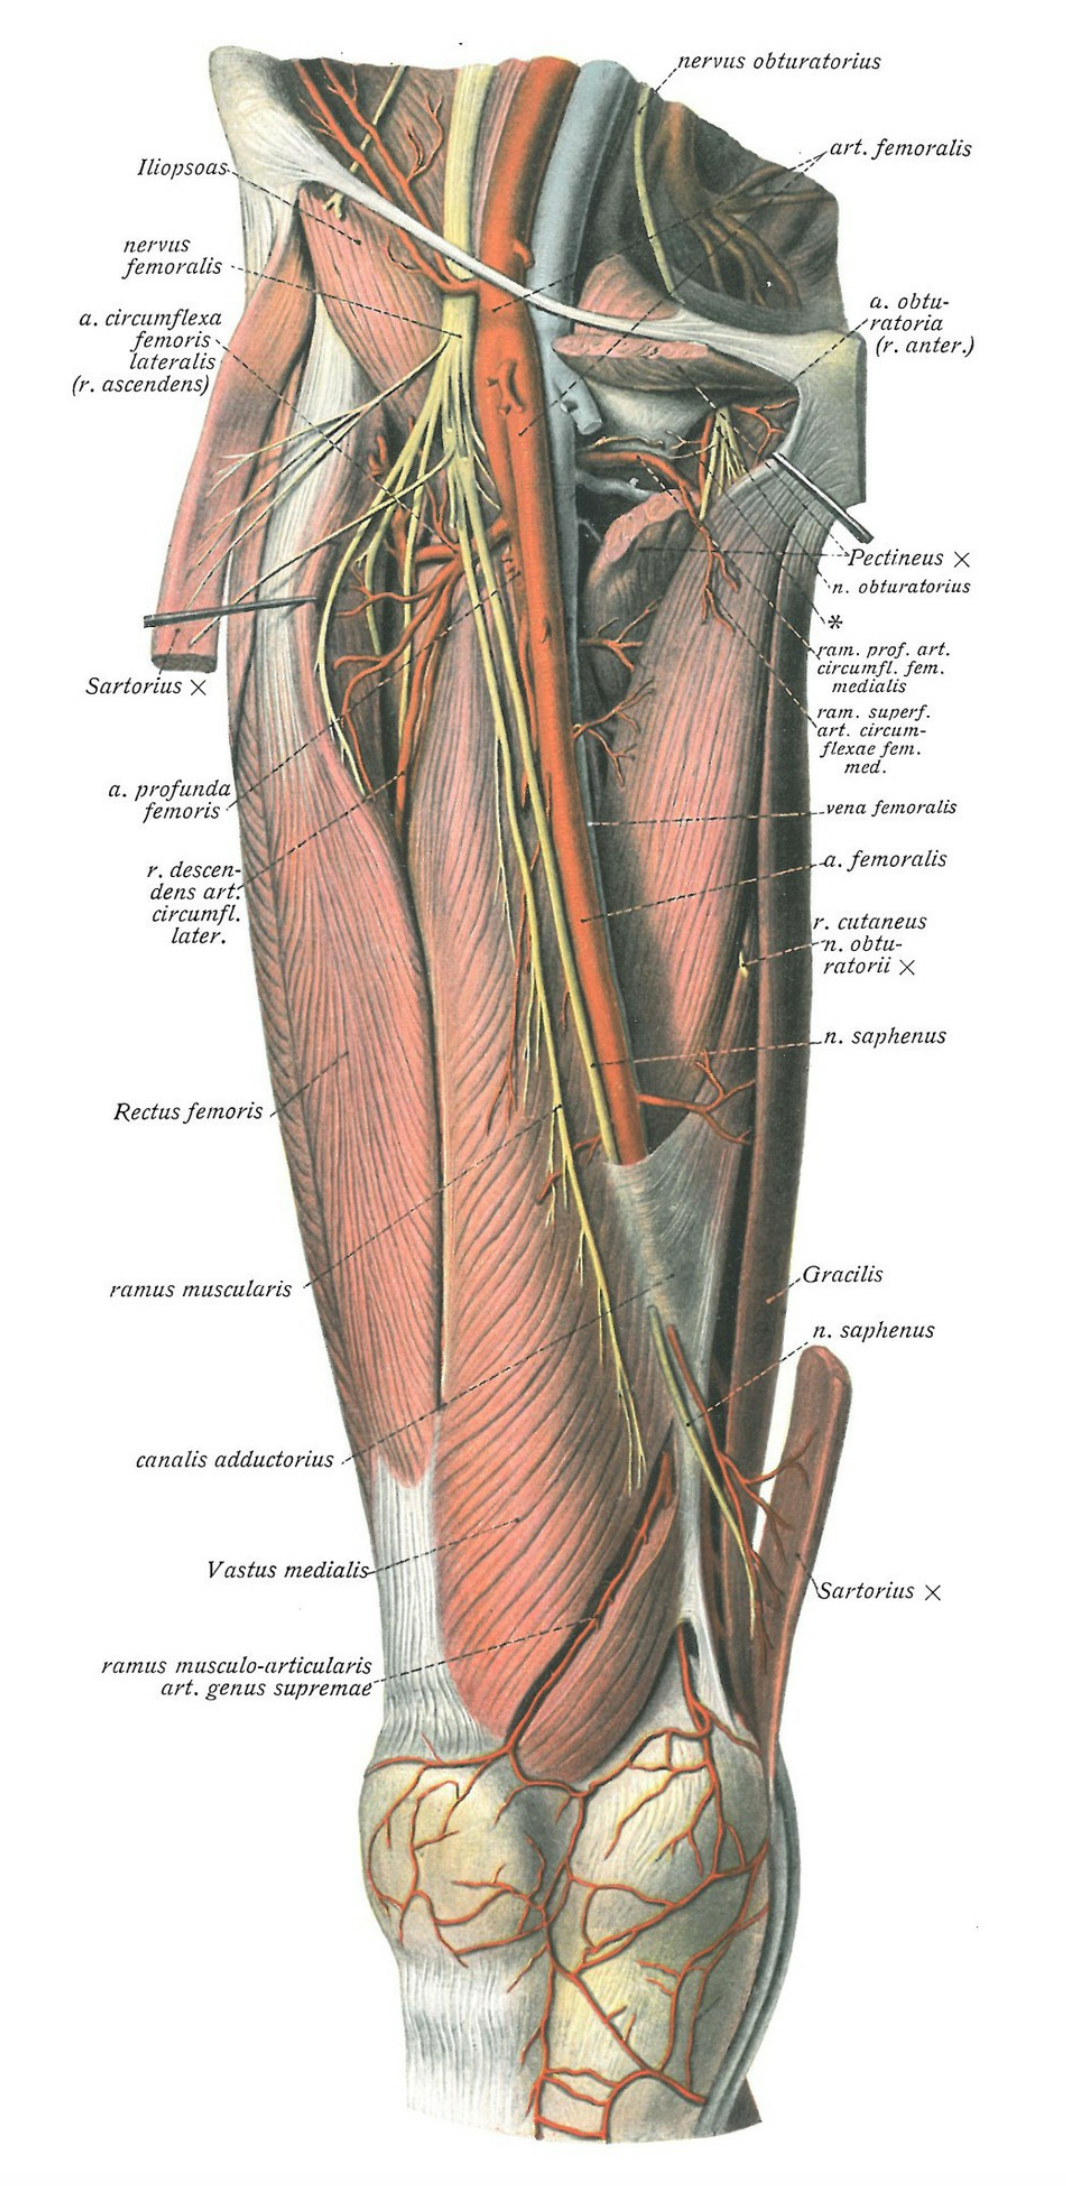  The femoral vein lies anteromedially in the thigh: initially deep to the femoral artery and medial to it as it ascends. The confluence of the profunda femoris (approximately 4 cm below the inguinal ligament) forms the common femoral vein which trans